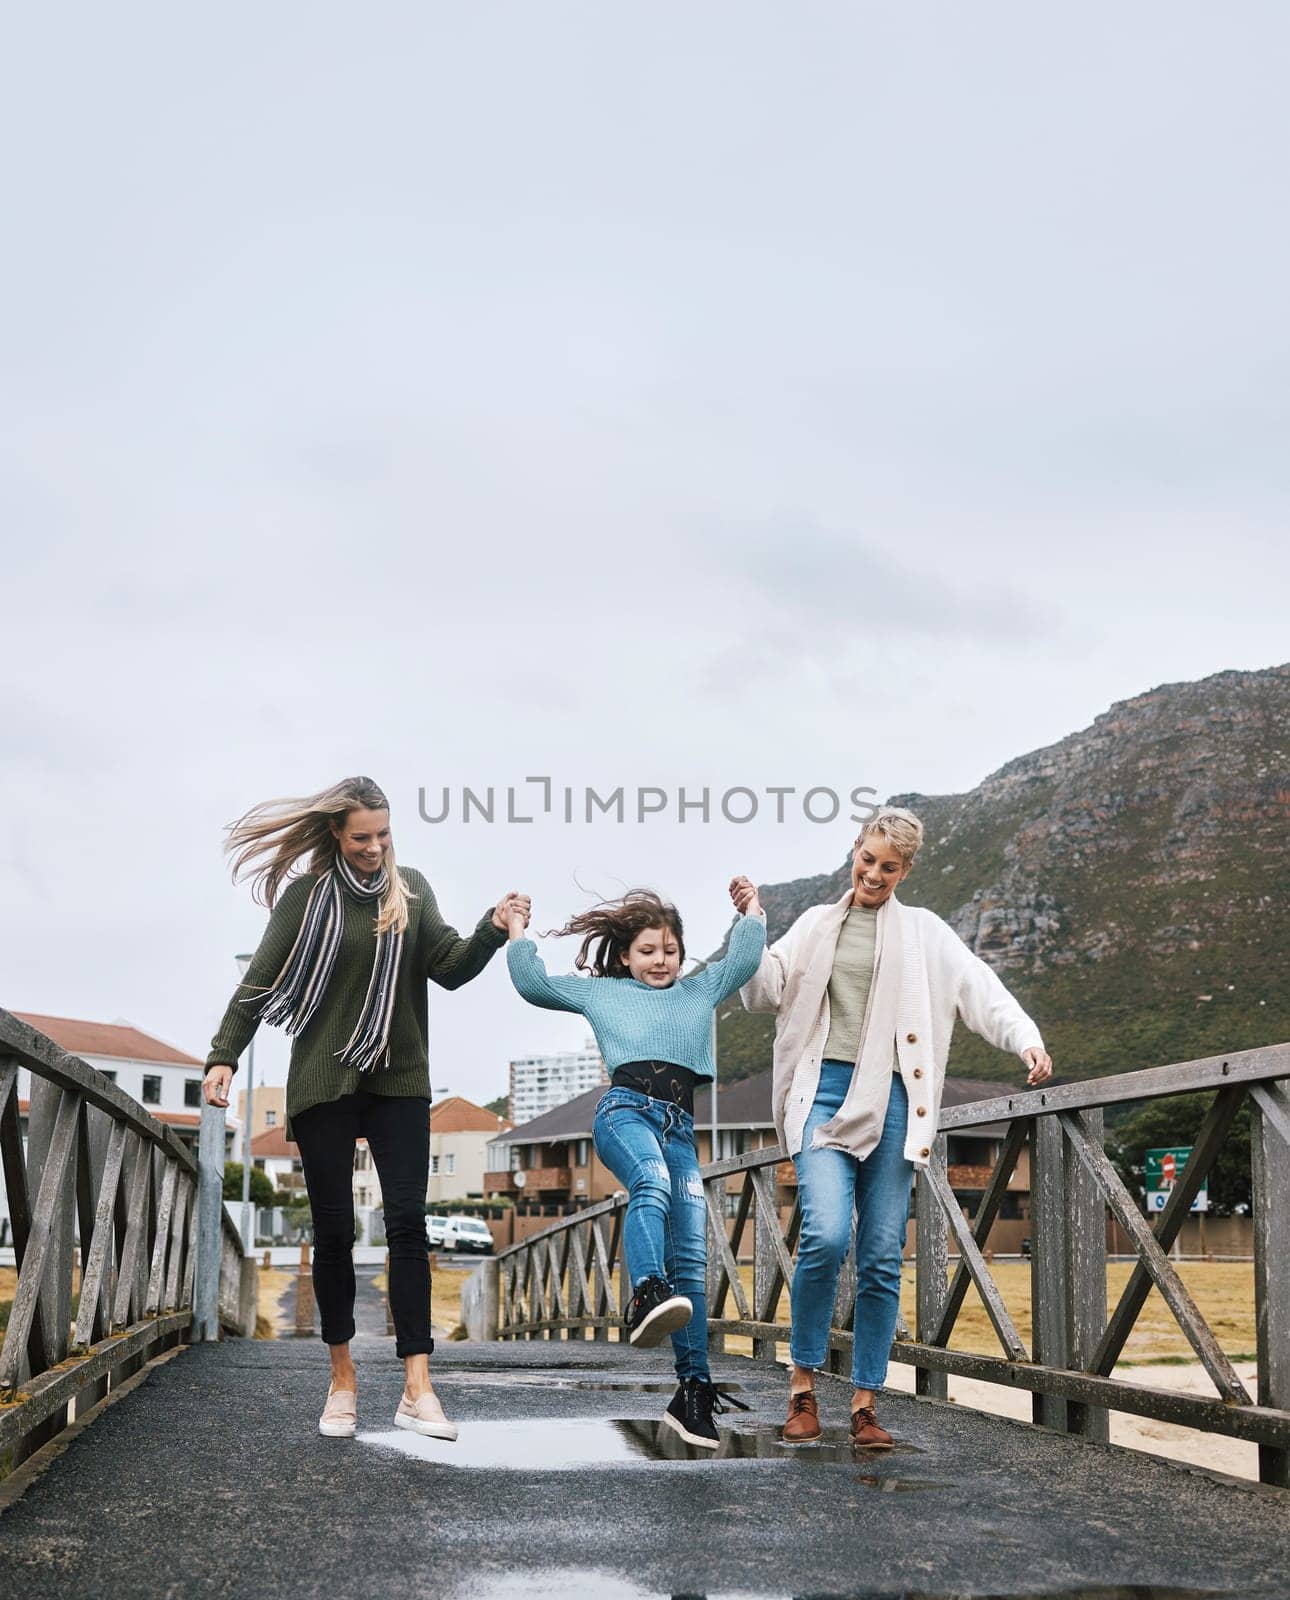 Happy, travel and family on outdoor walk while on a spring vacation, adventure or journey. Grandmother, mother and girl child walking on bridge together with happiness, fun and bond while on holiday. by YuriArcurs